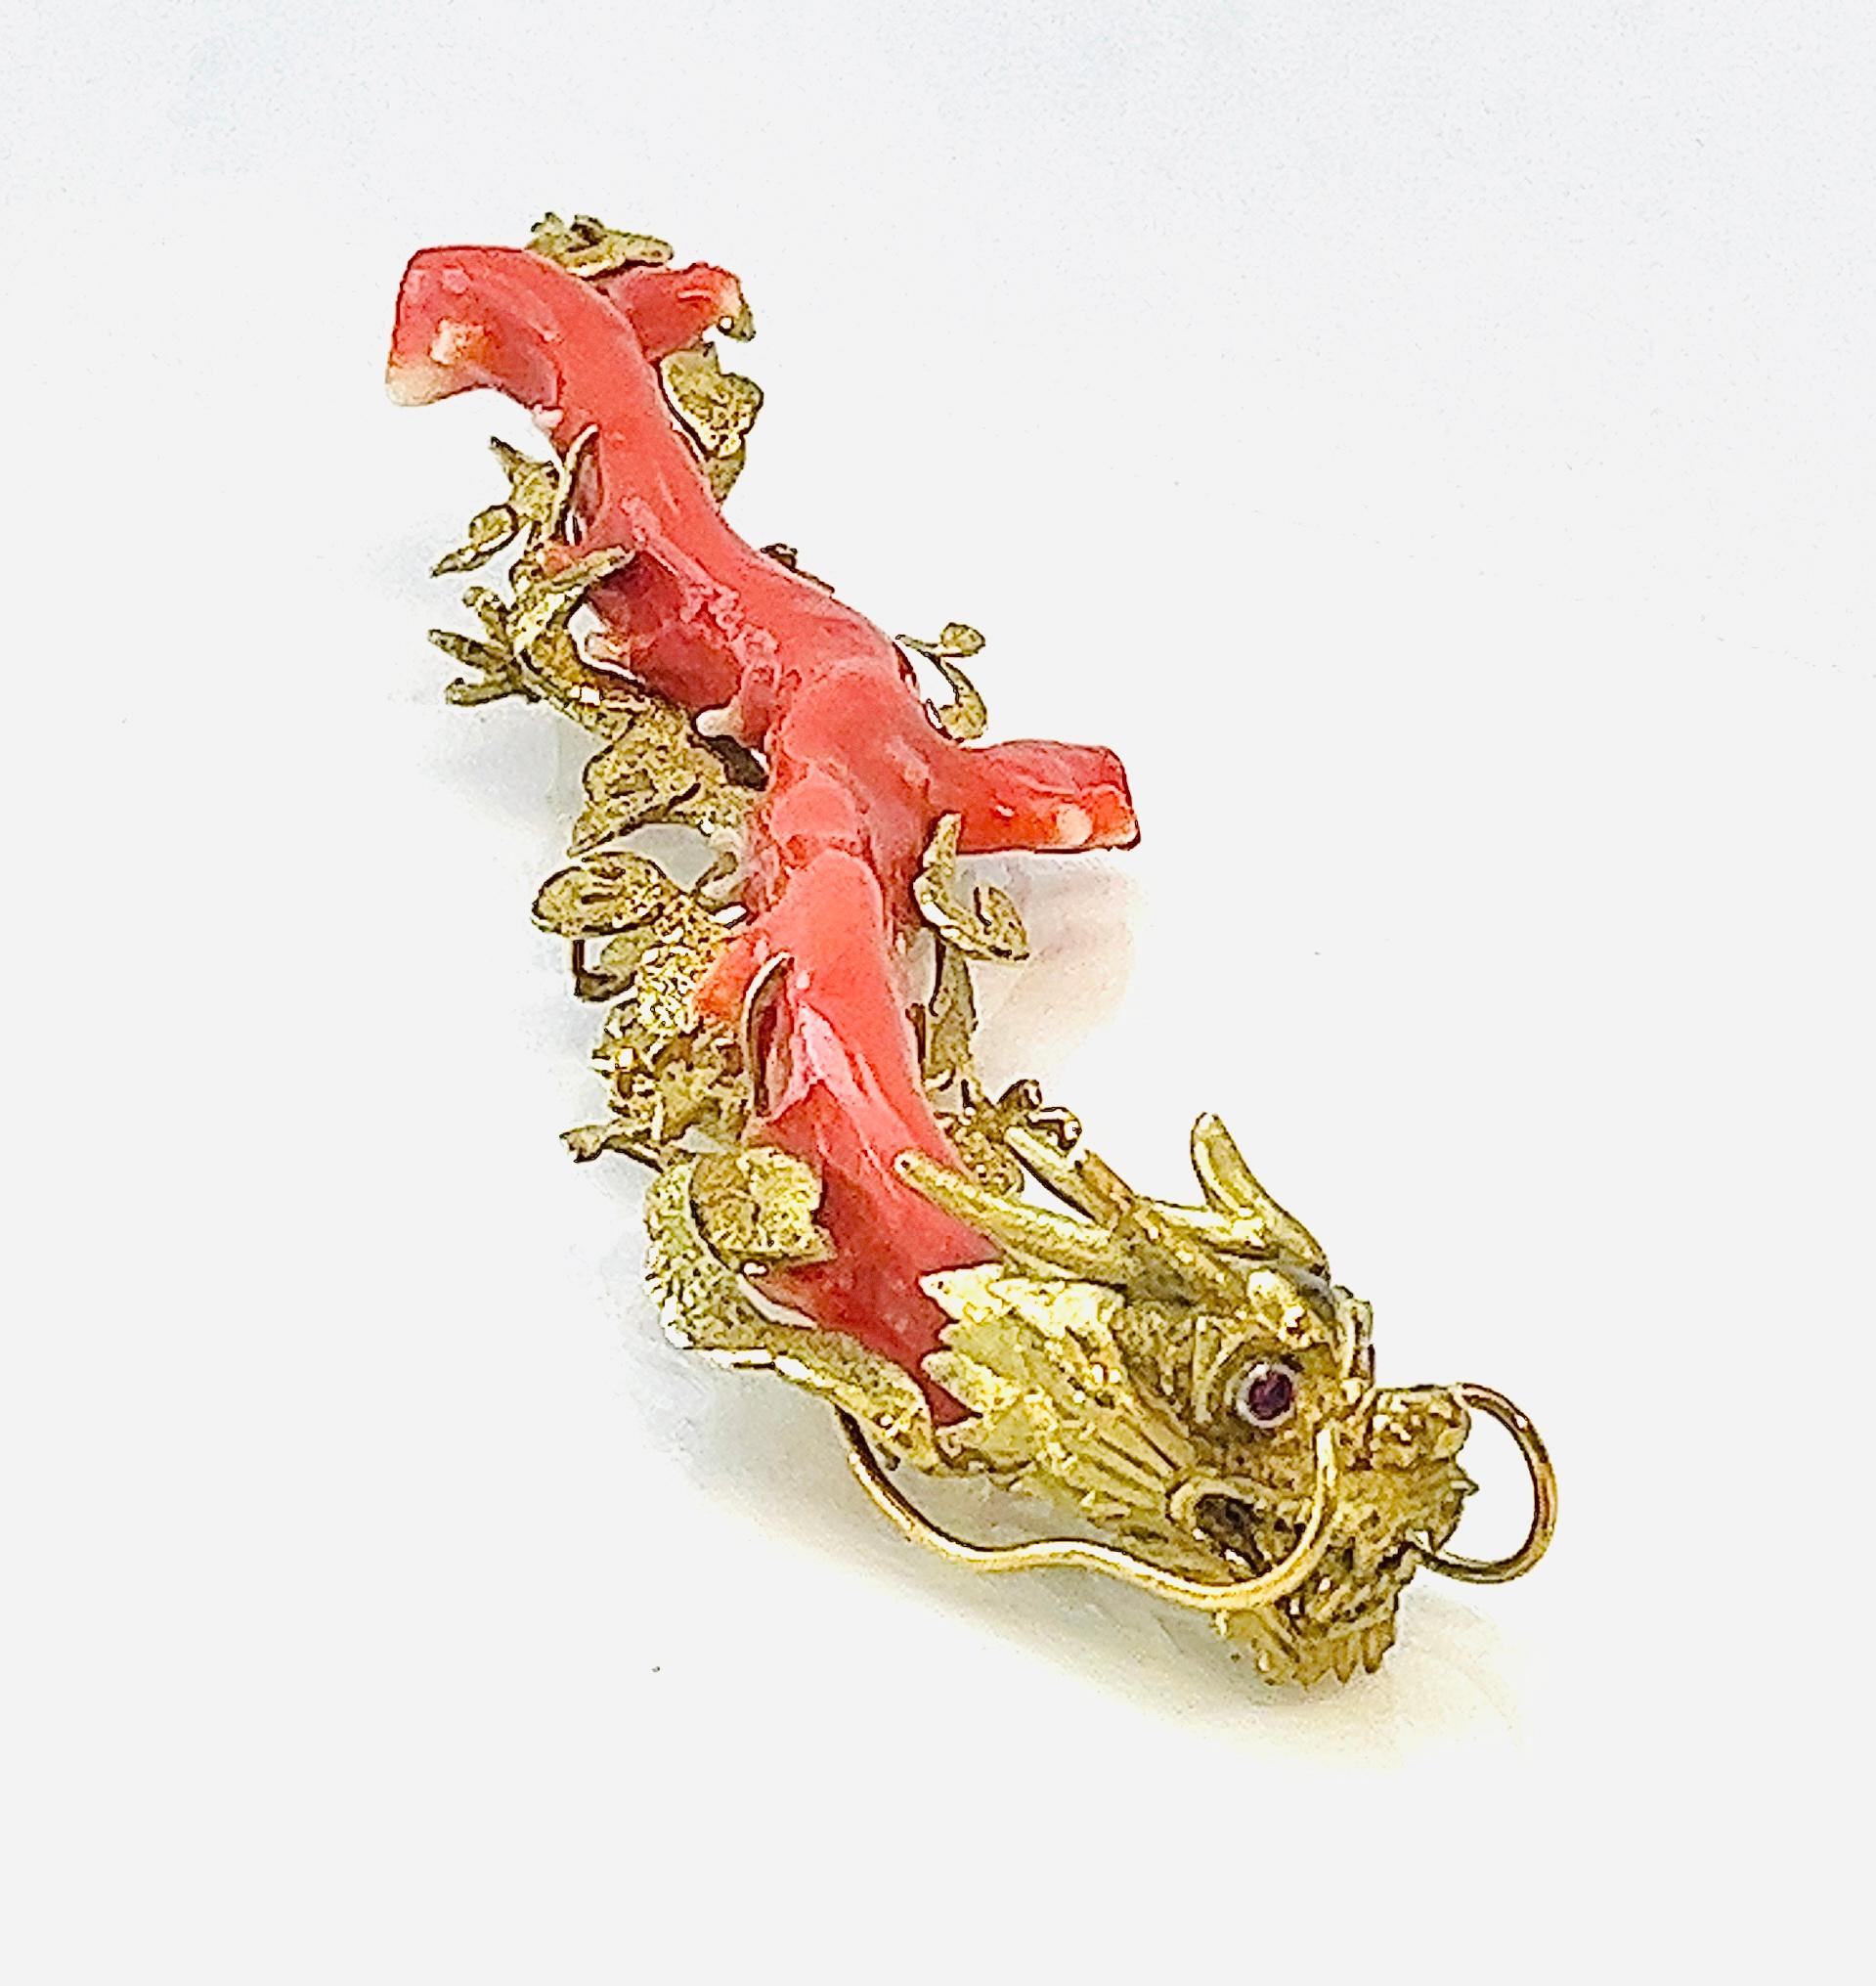 Rare Dragon Mediterranean Coral and 14K Yellow Gold Brooch, 1970's.